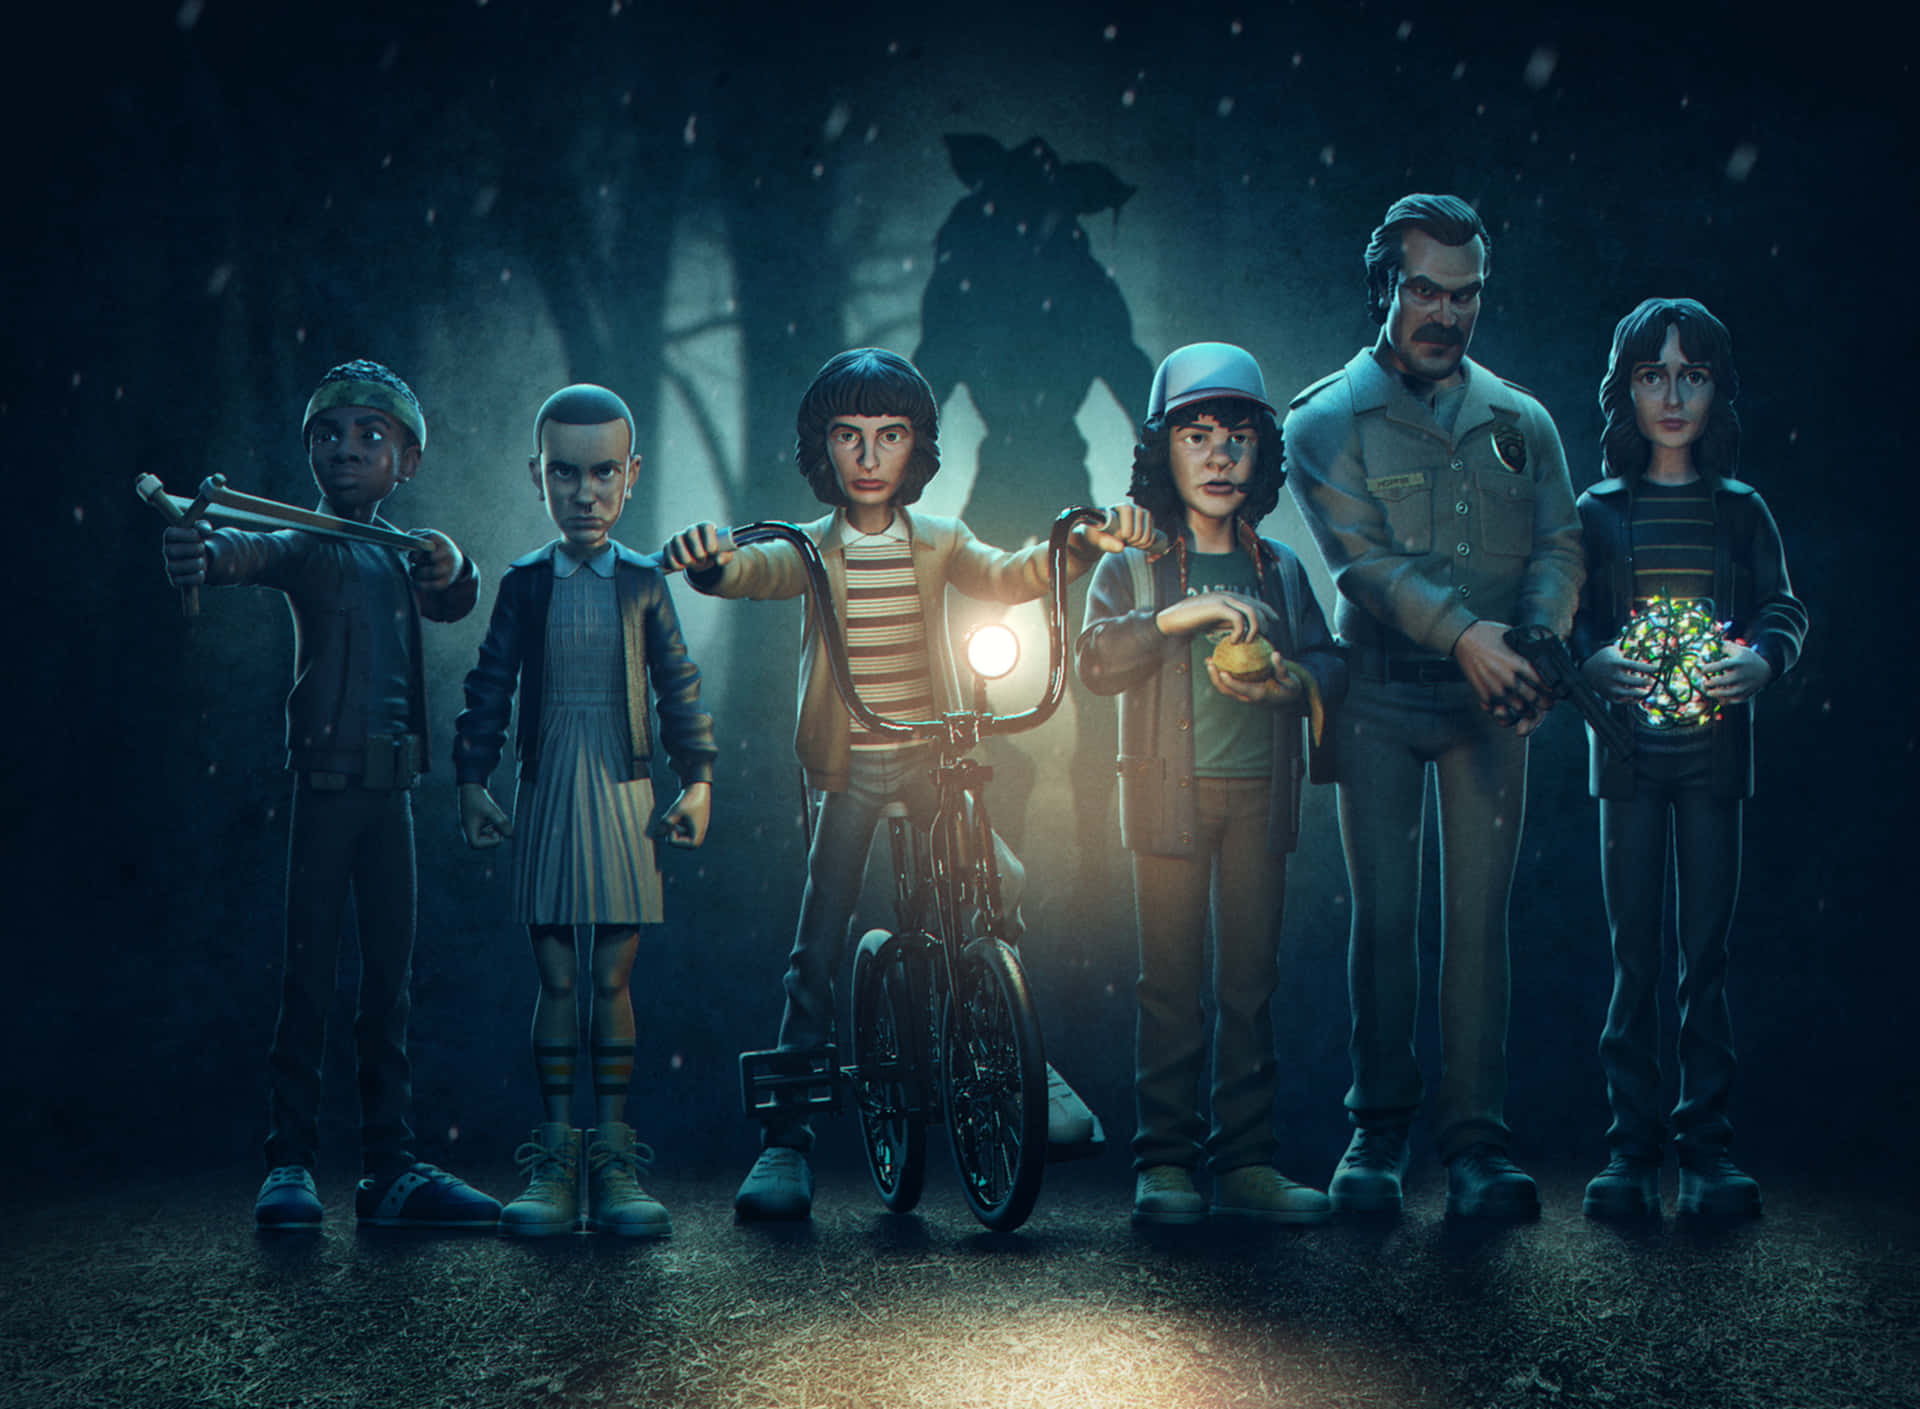 Mörkstranger Things Konst (for A Computer Or Mobile Wallpaper With A Dark Theme) Wallpaper